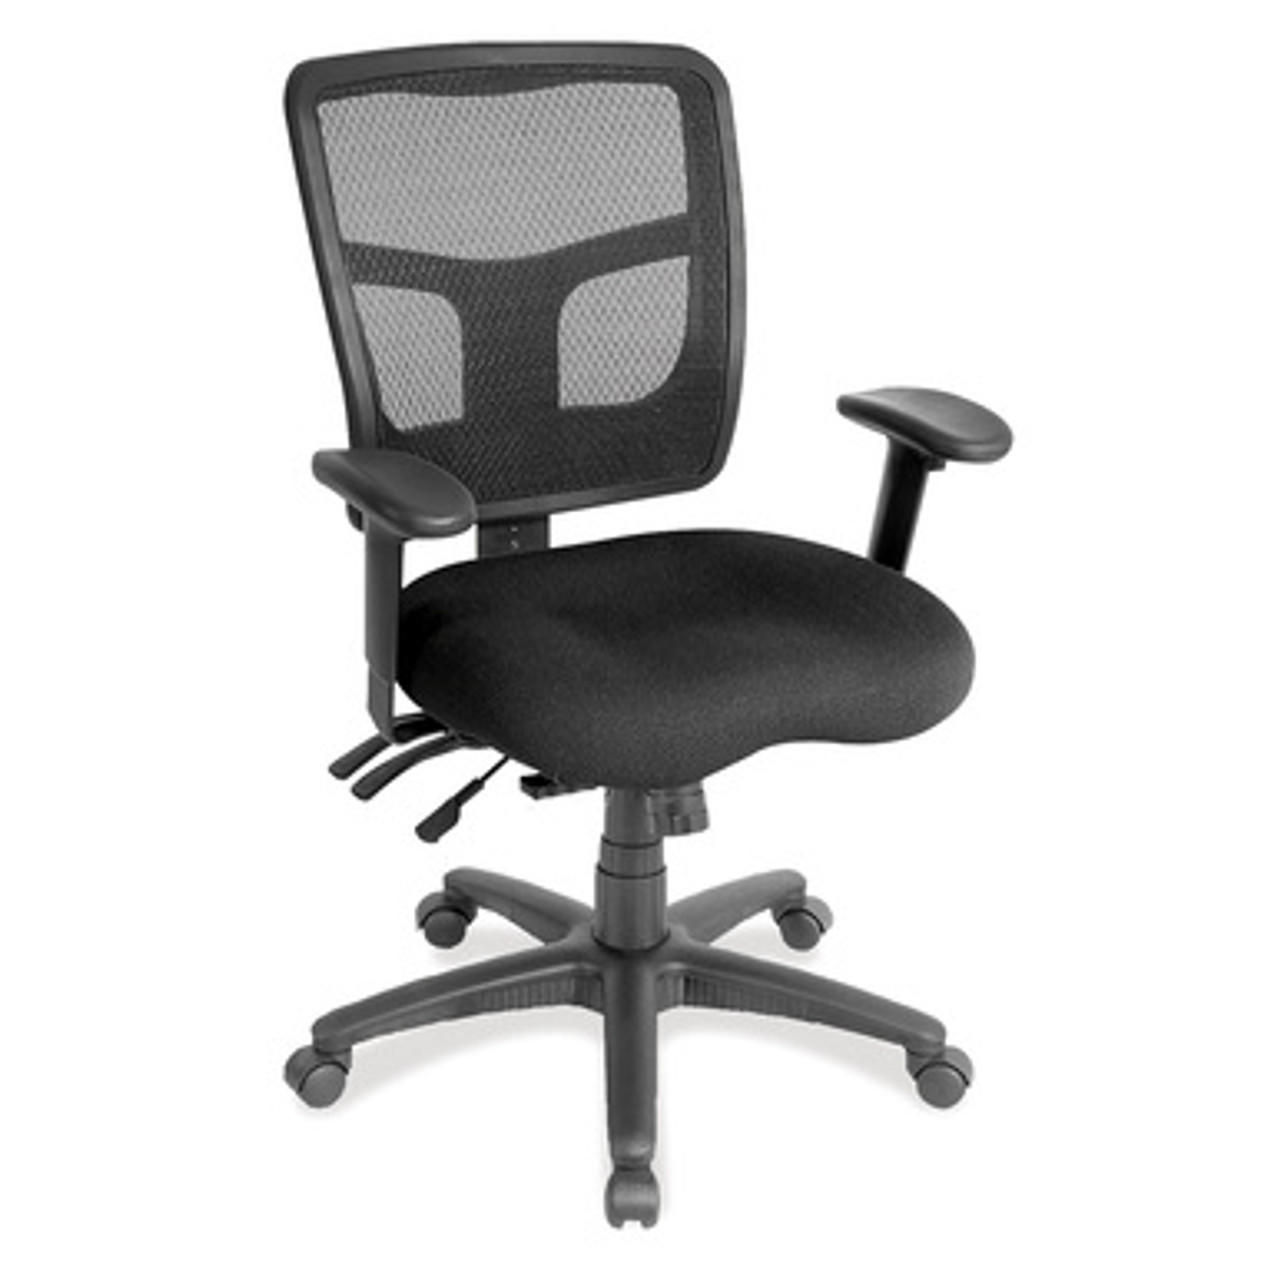  Office Source CoolMesh Mid Back Multi Function Task Chair with Seat Slider 7754ASNSF 